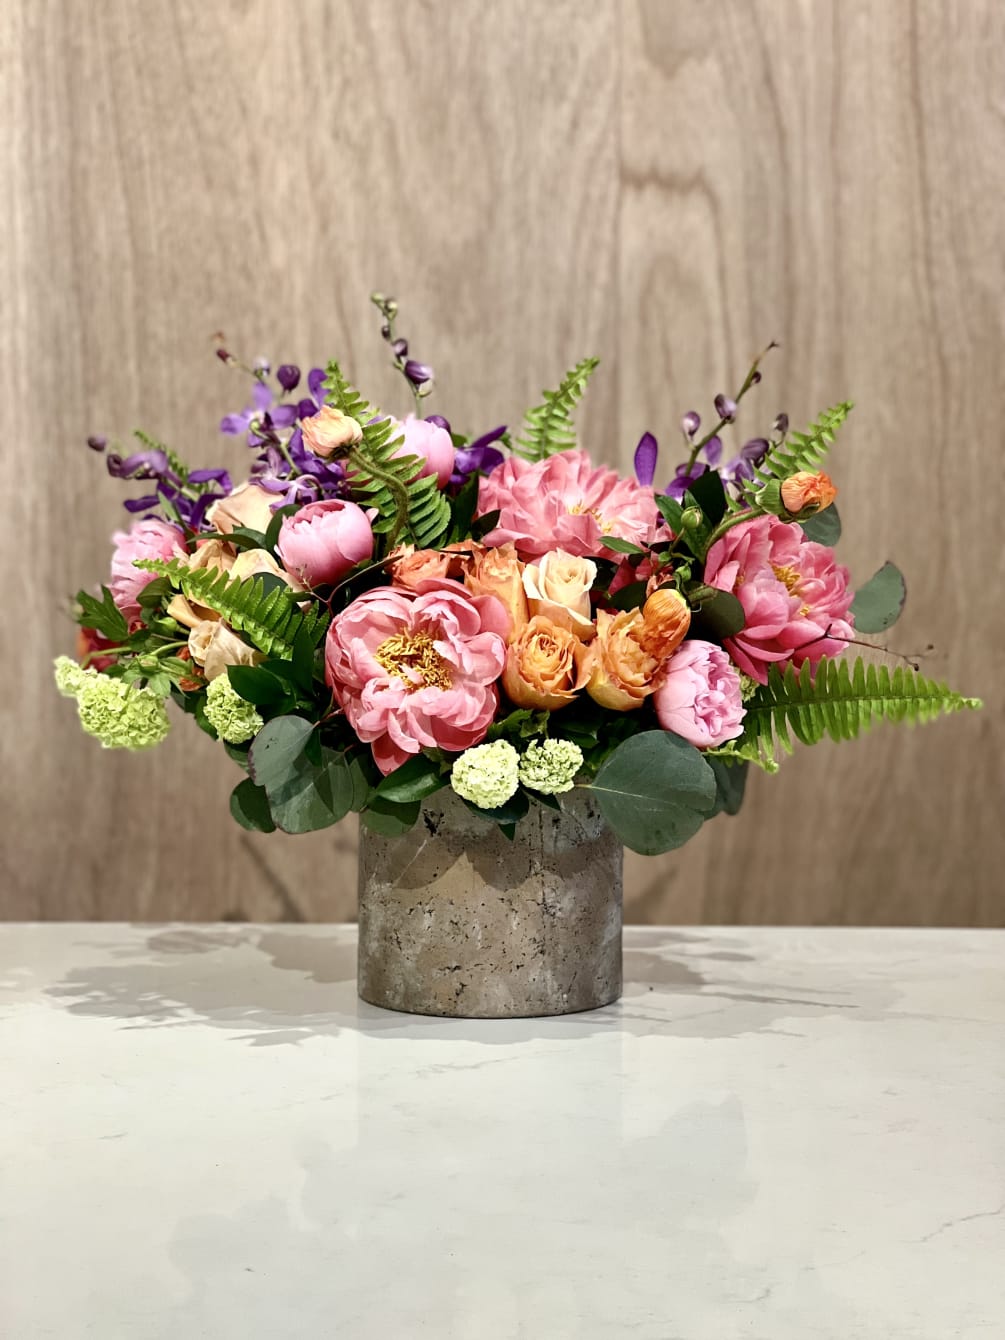 Celebrate the season with our lively display of garden blooms. Abundant coral